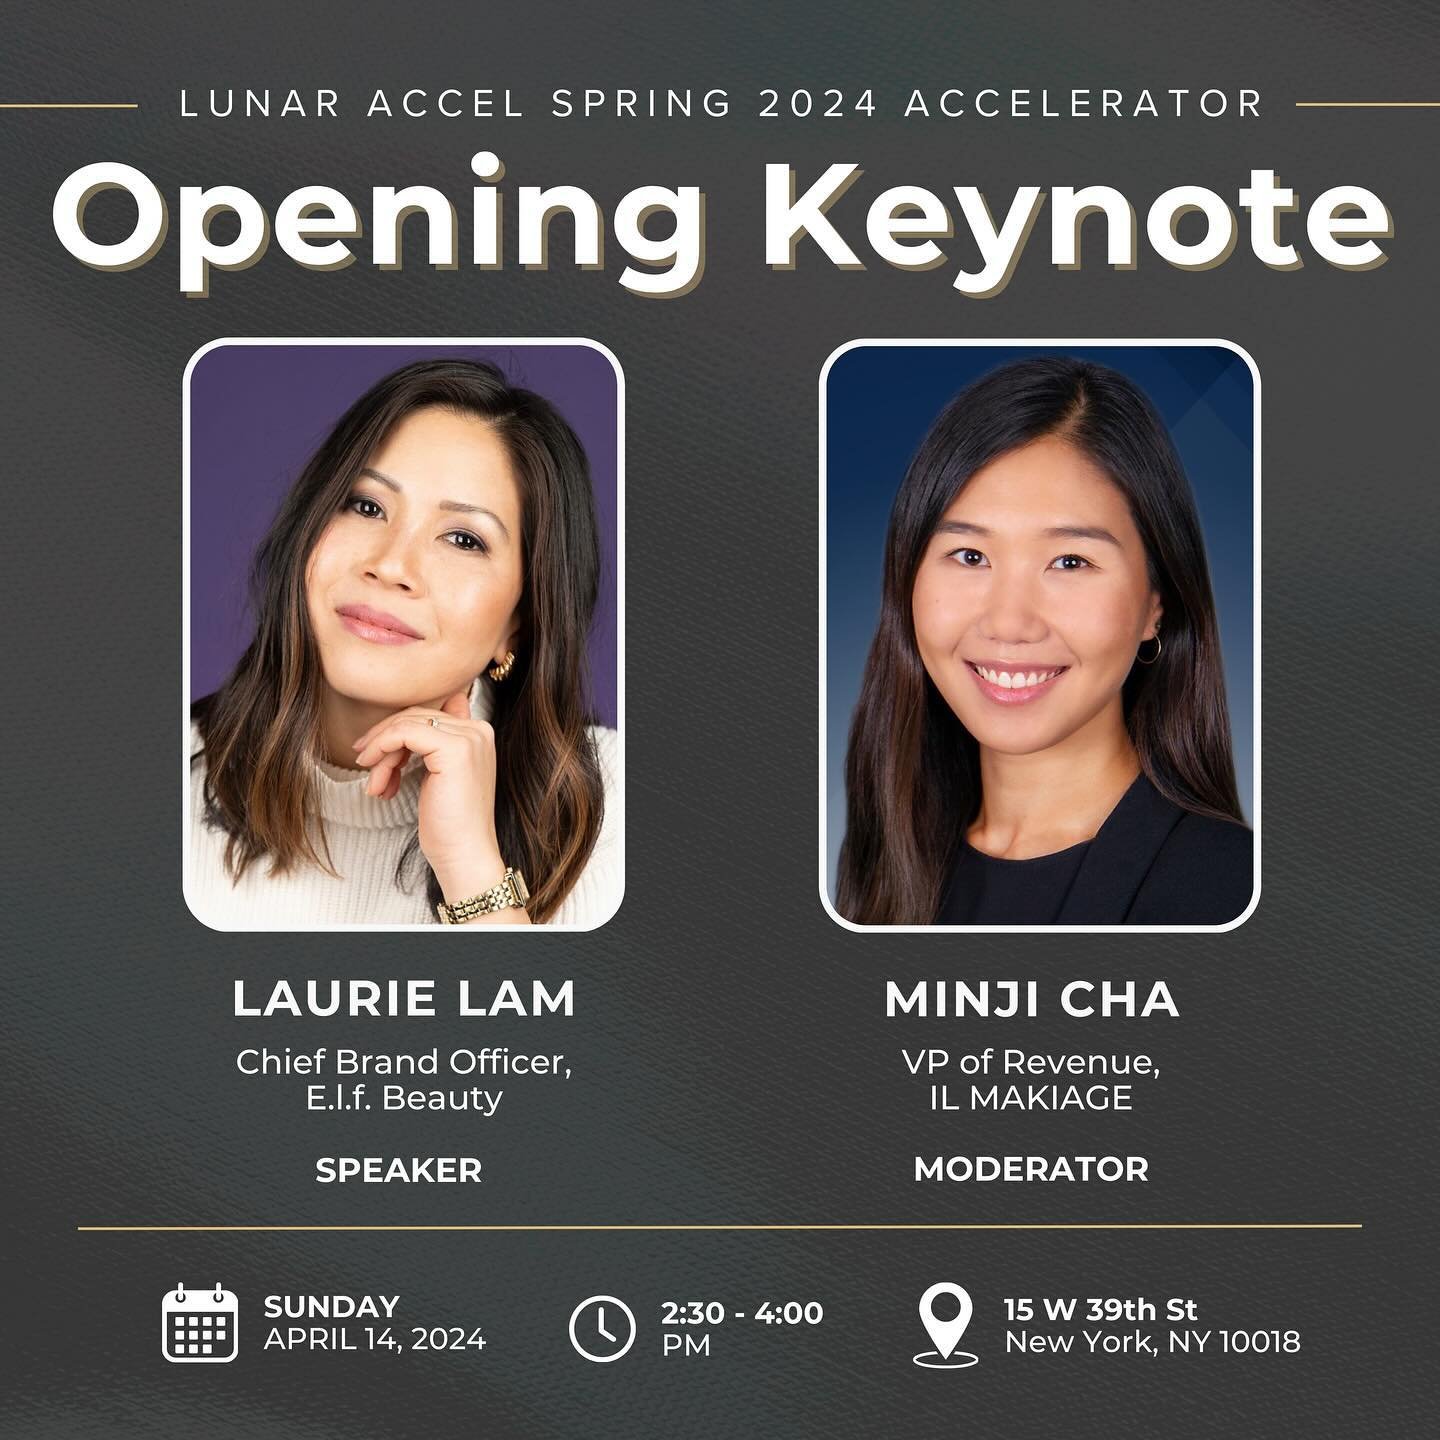 🎟️ RSVP FOR YOUR TICKETS TODAY 🎟️

Join us THIS SUNDAY, April 14, to hear from Laurie Lam, Chief Brand Officer of @elfcosmetics, dive into how she achieved upward mobility in the corporate environment, the impact of mentorship, the influence of her